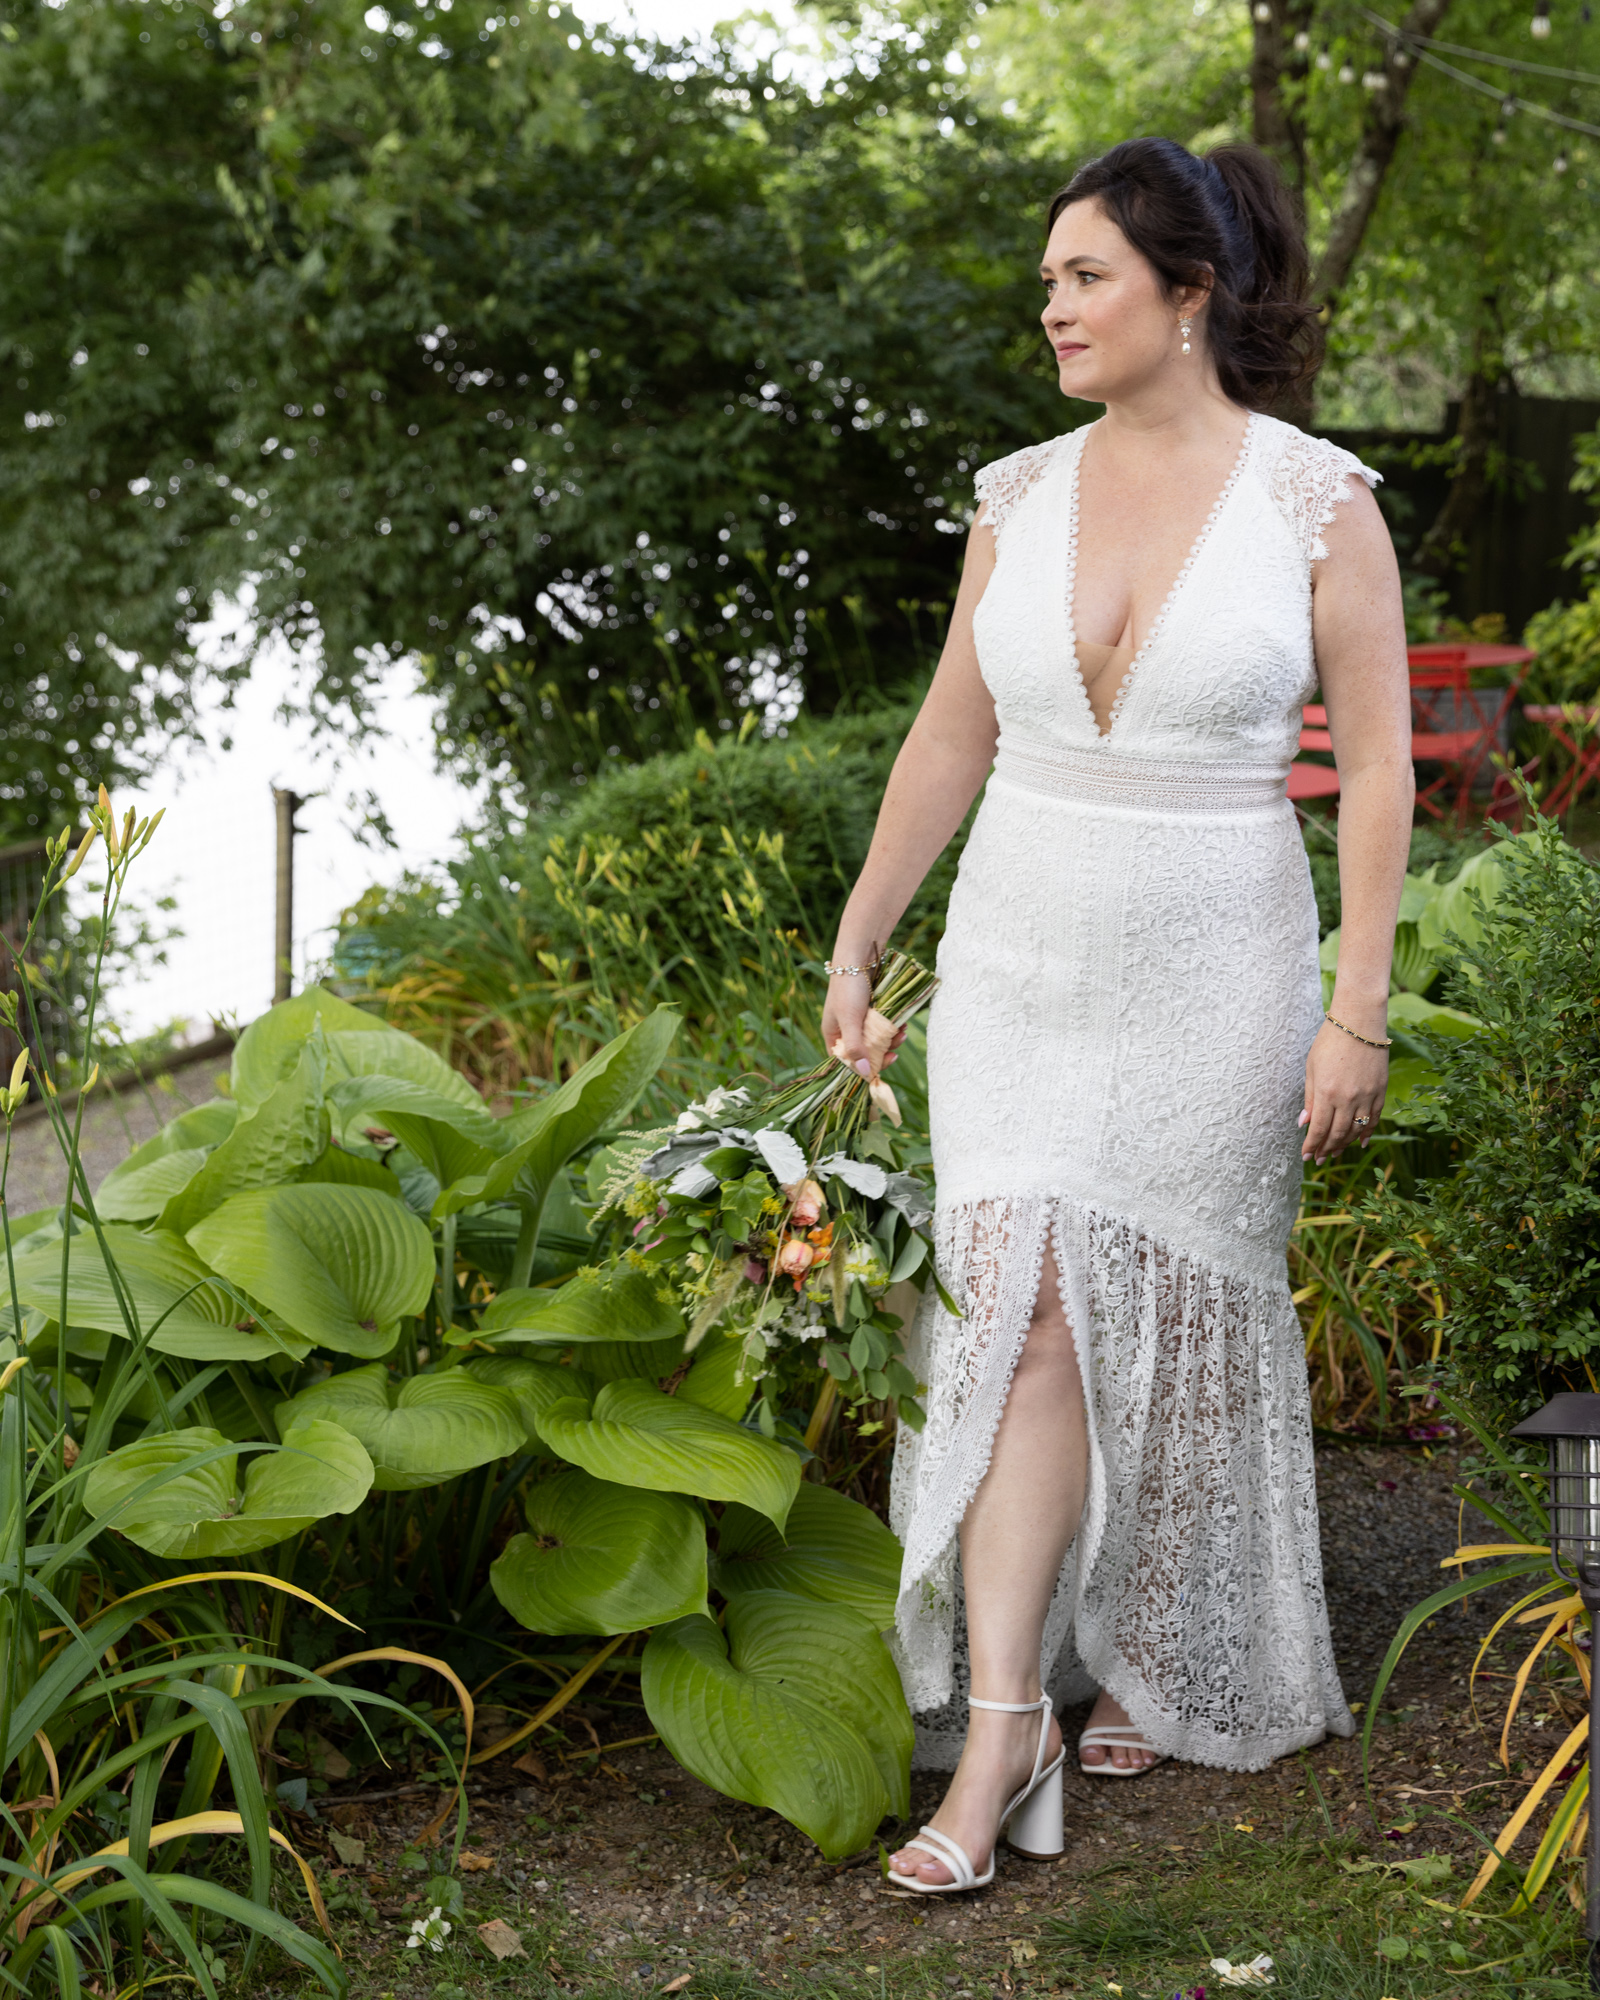 Candid photograph of an elegant bride walking after her wedding at Bridgeton House on the Delaware in Bucks County, PA